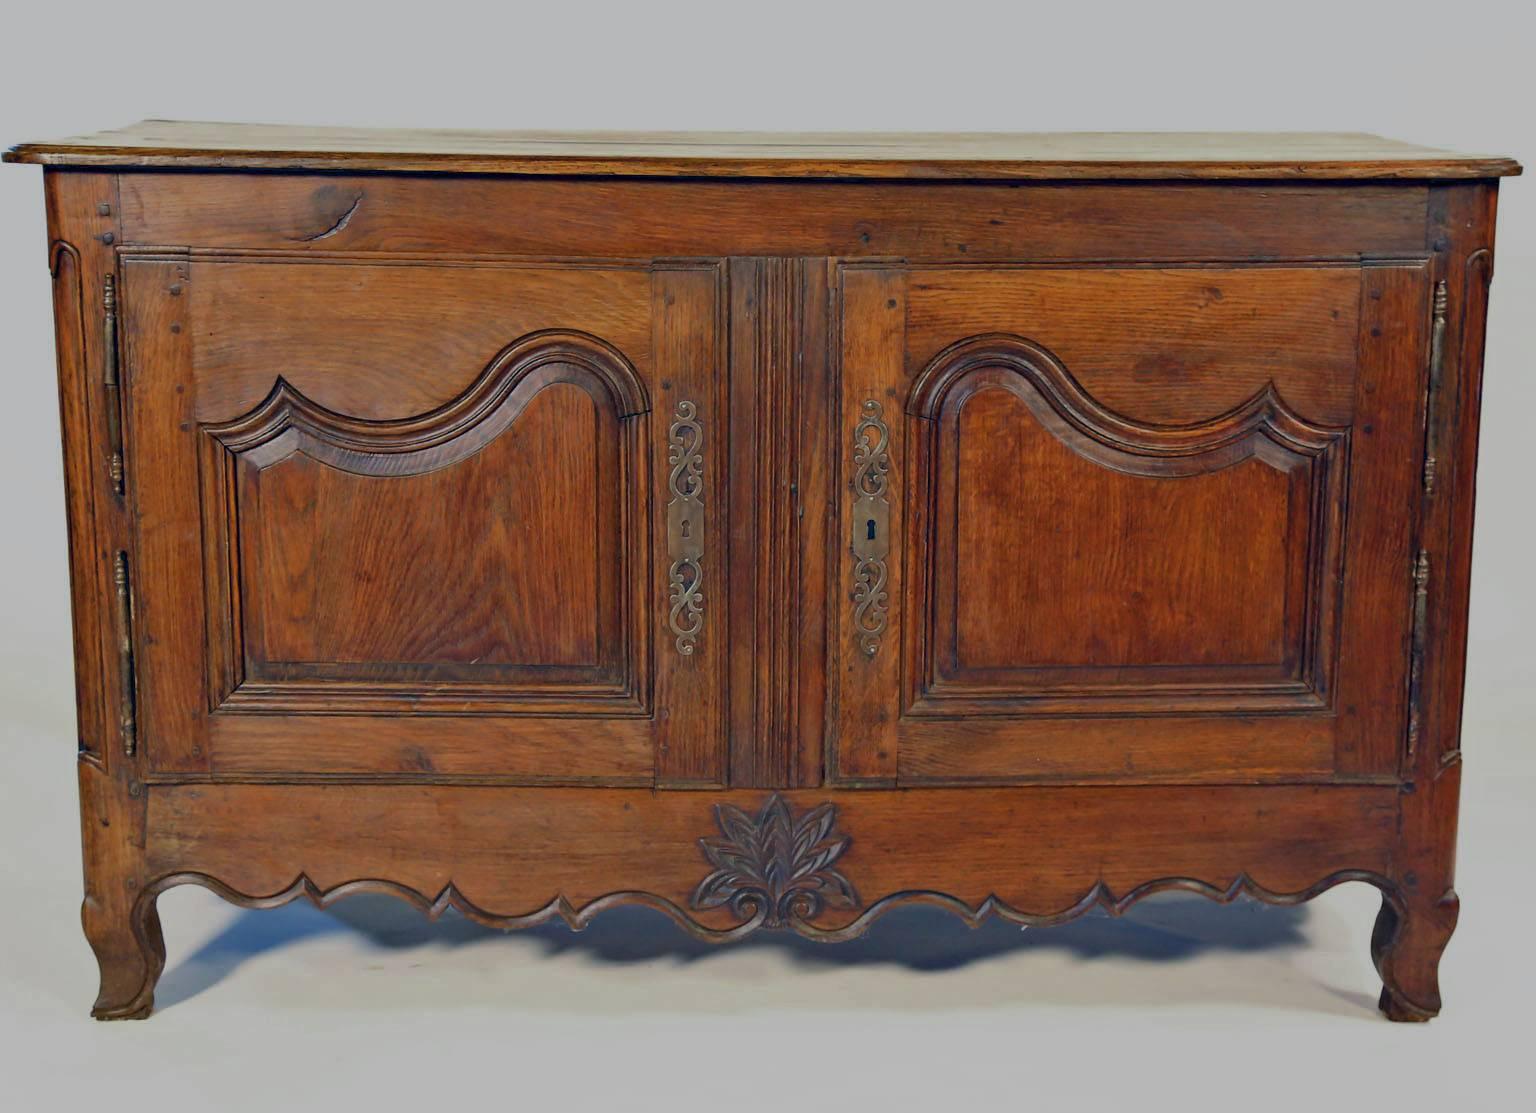 19th century buffet with beautiful plank top with a beveled edge, over two carved and molded paneled doors. Paneled Doors have Double hinges and an ornamental key plate over a scalloped and molded apron with a central carved stylized Flower, resting